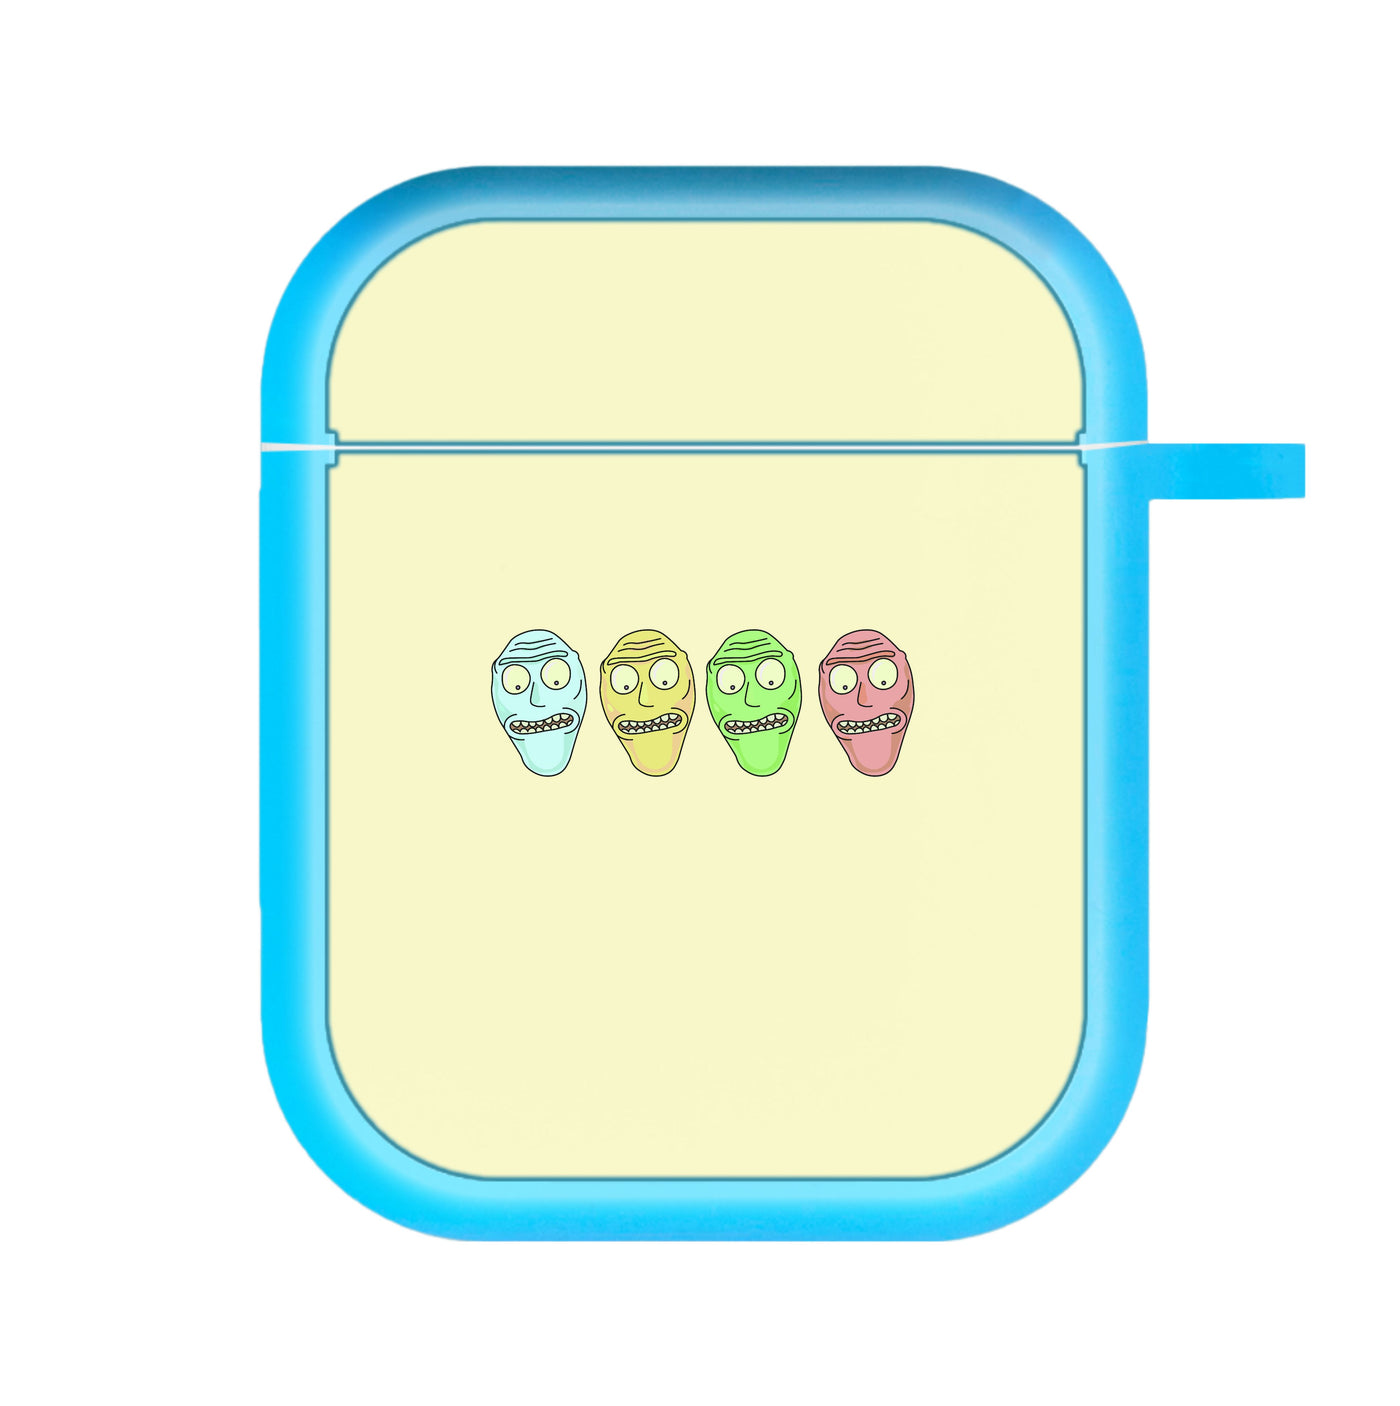 Get Schwifty - Rick And Morty AirPods Case